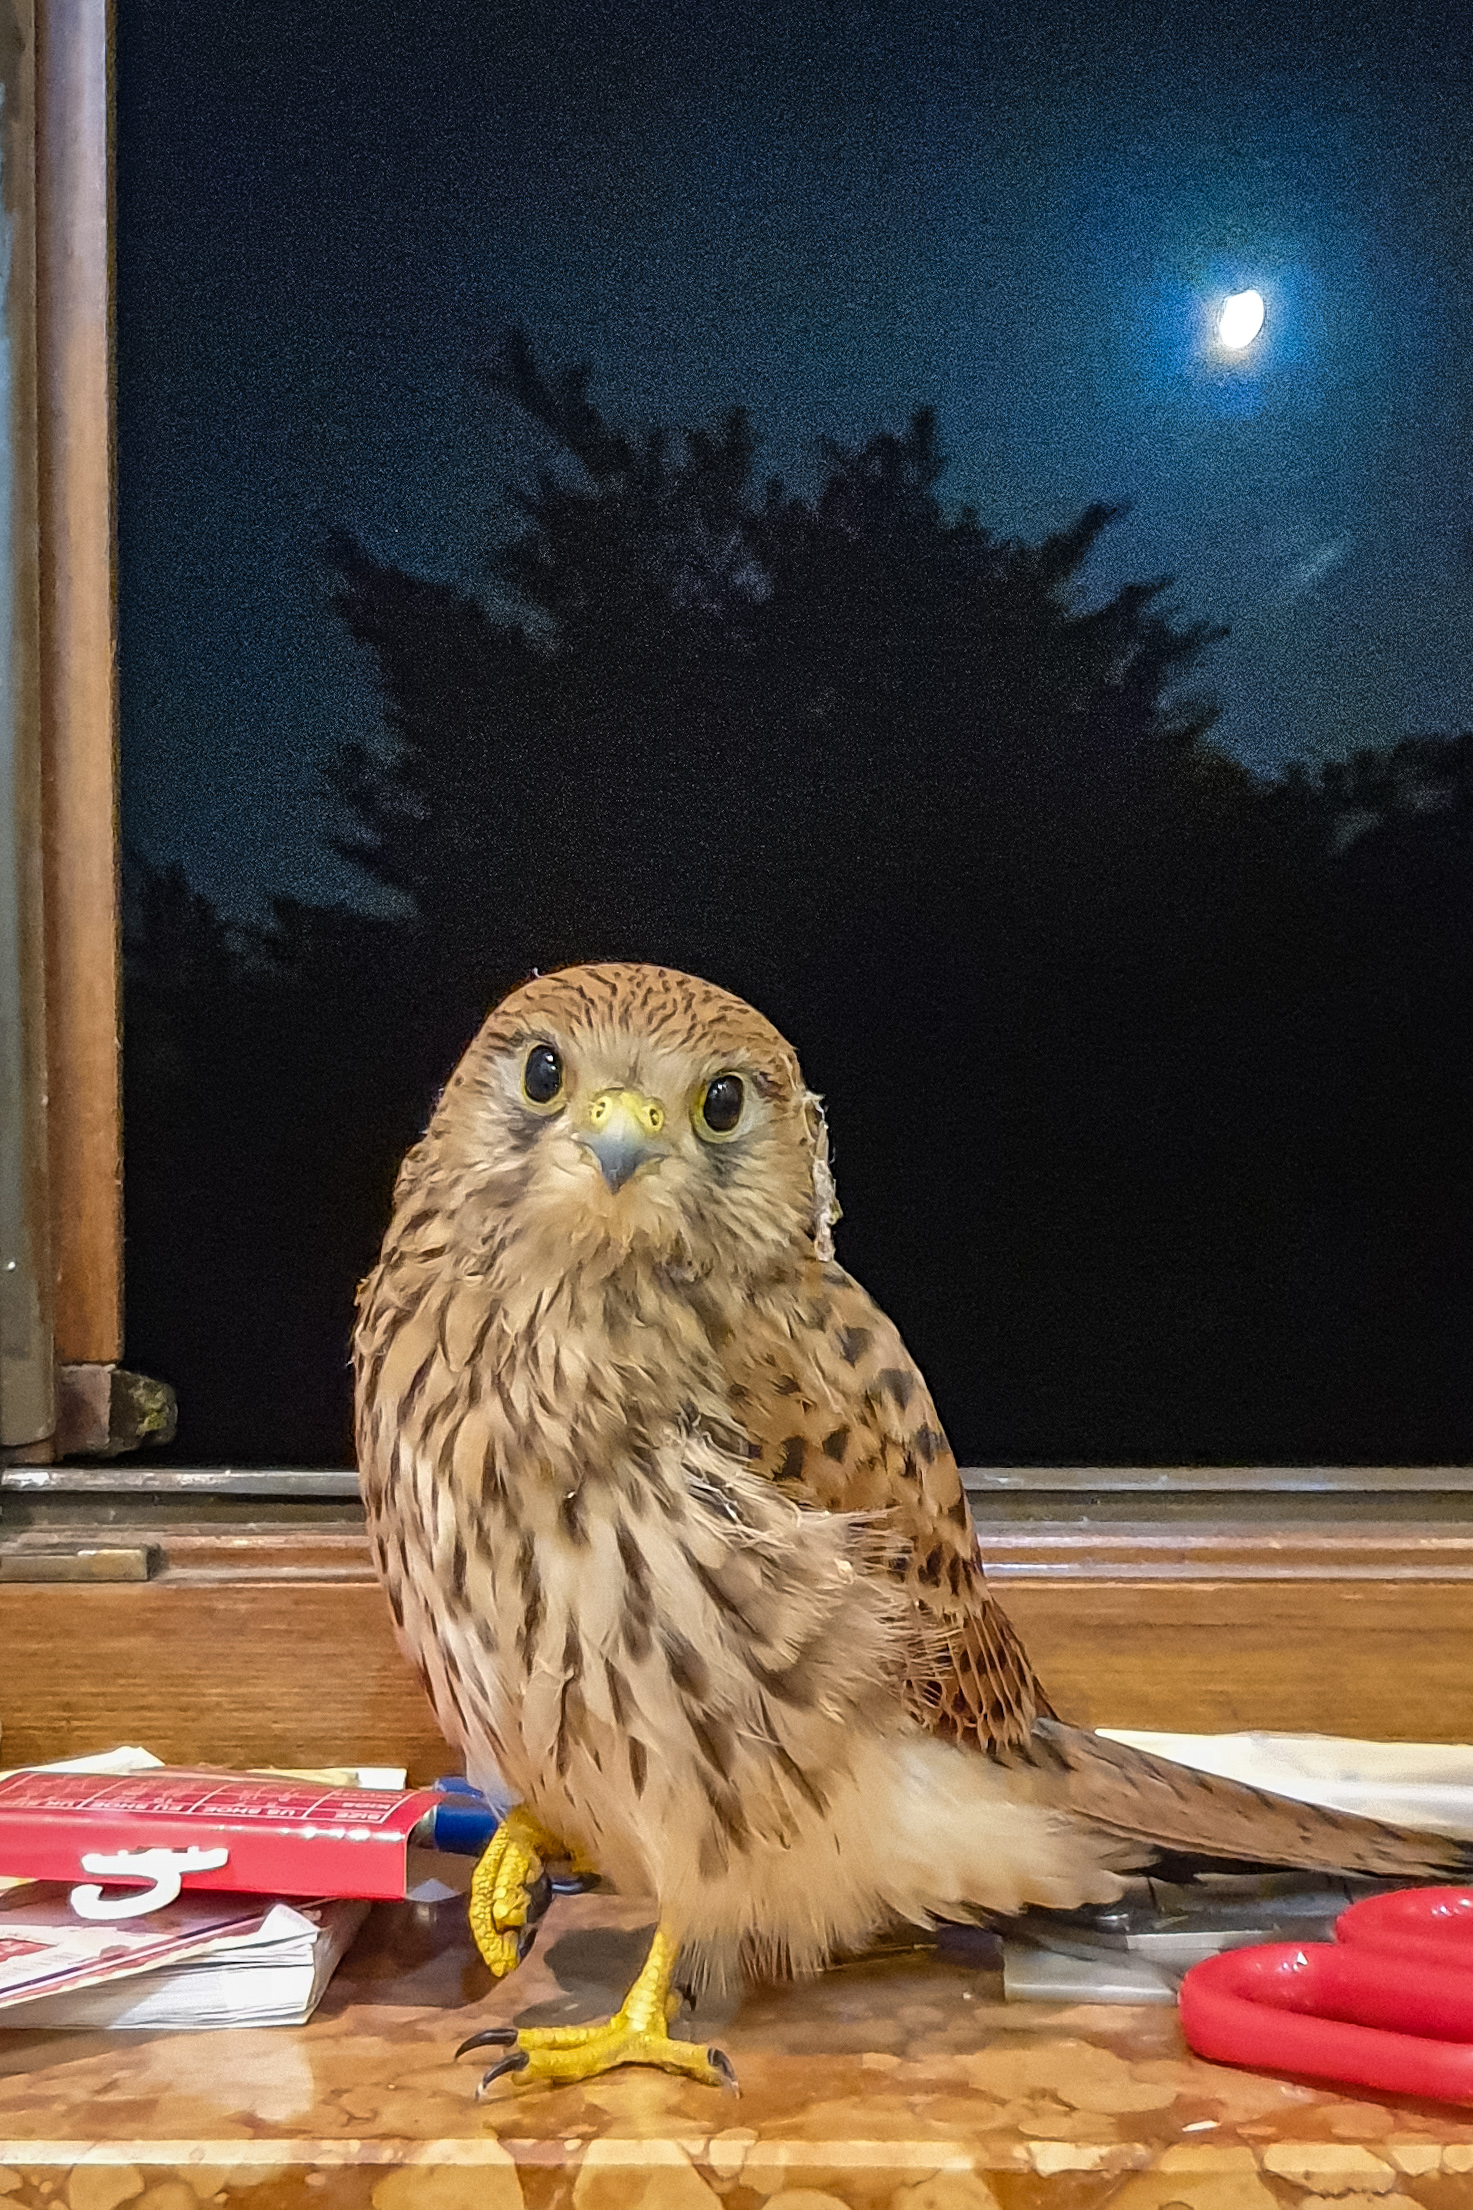 Female chegle on window lived in the moonlight...